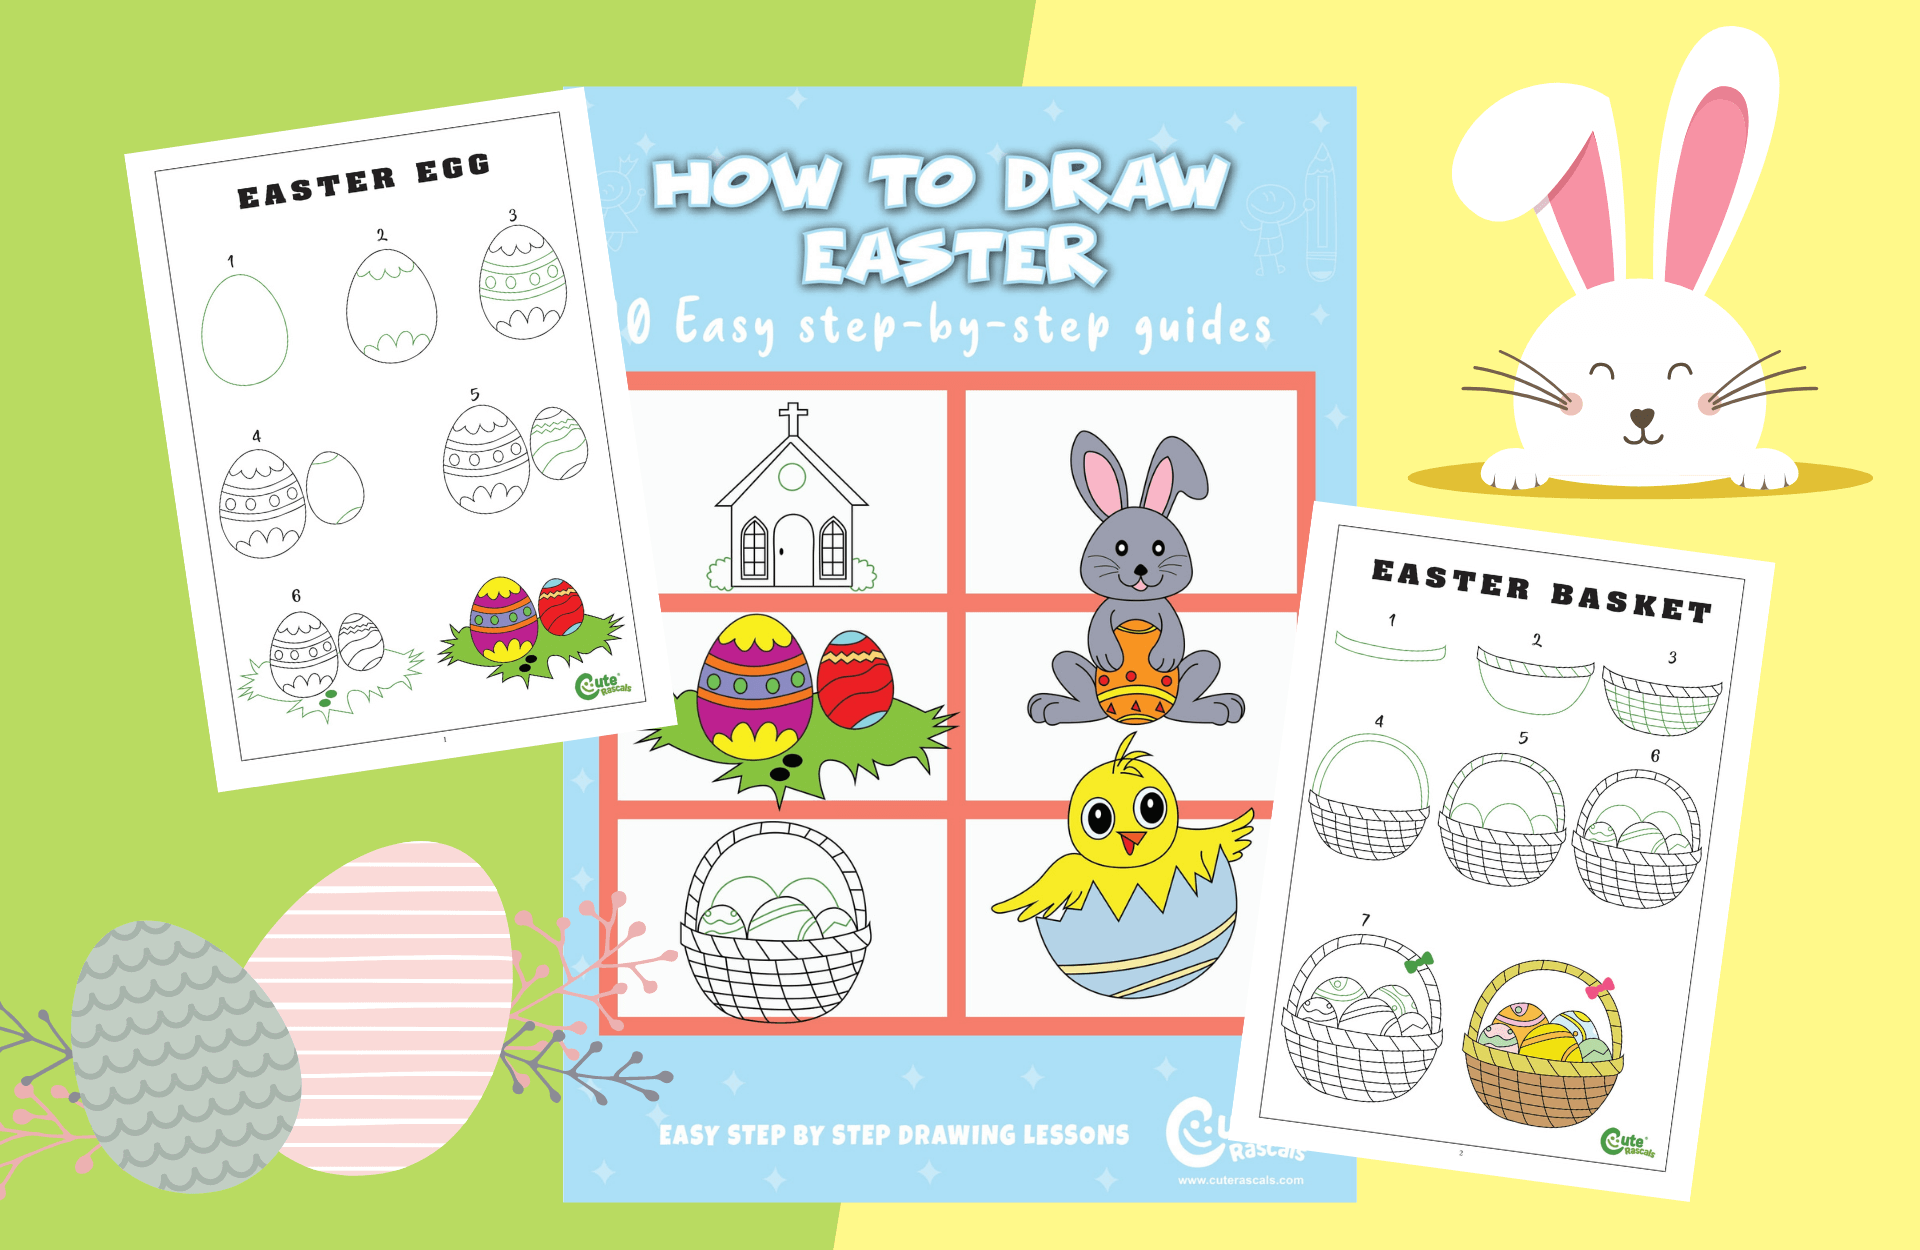 Easter Drawing Special: 10 How To Draw Easter Step -By -Step Guides